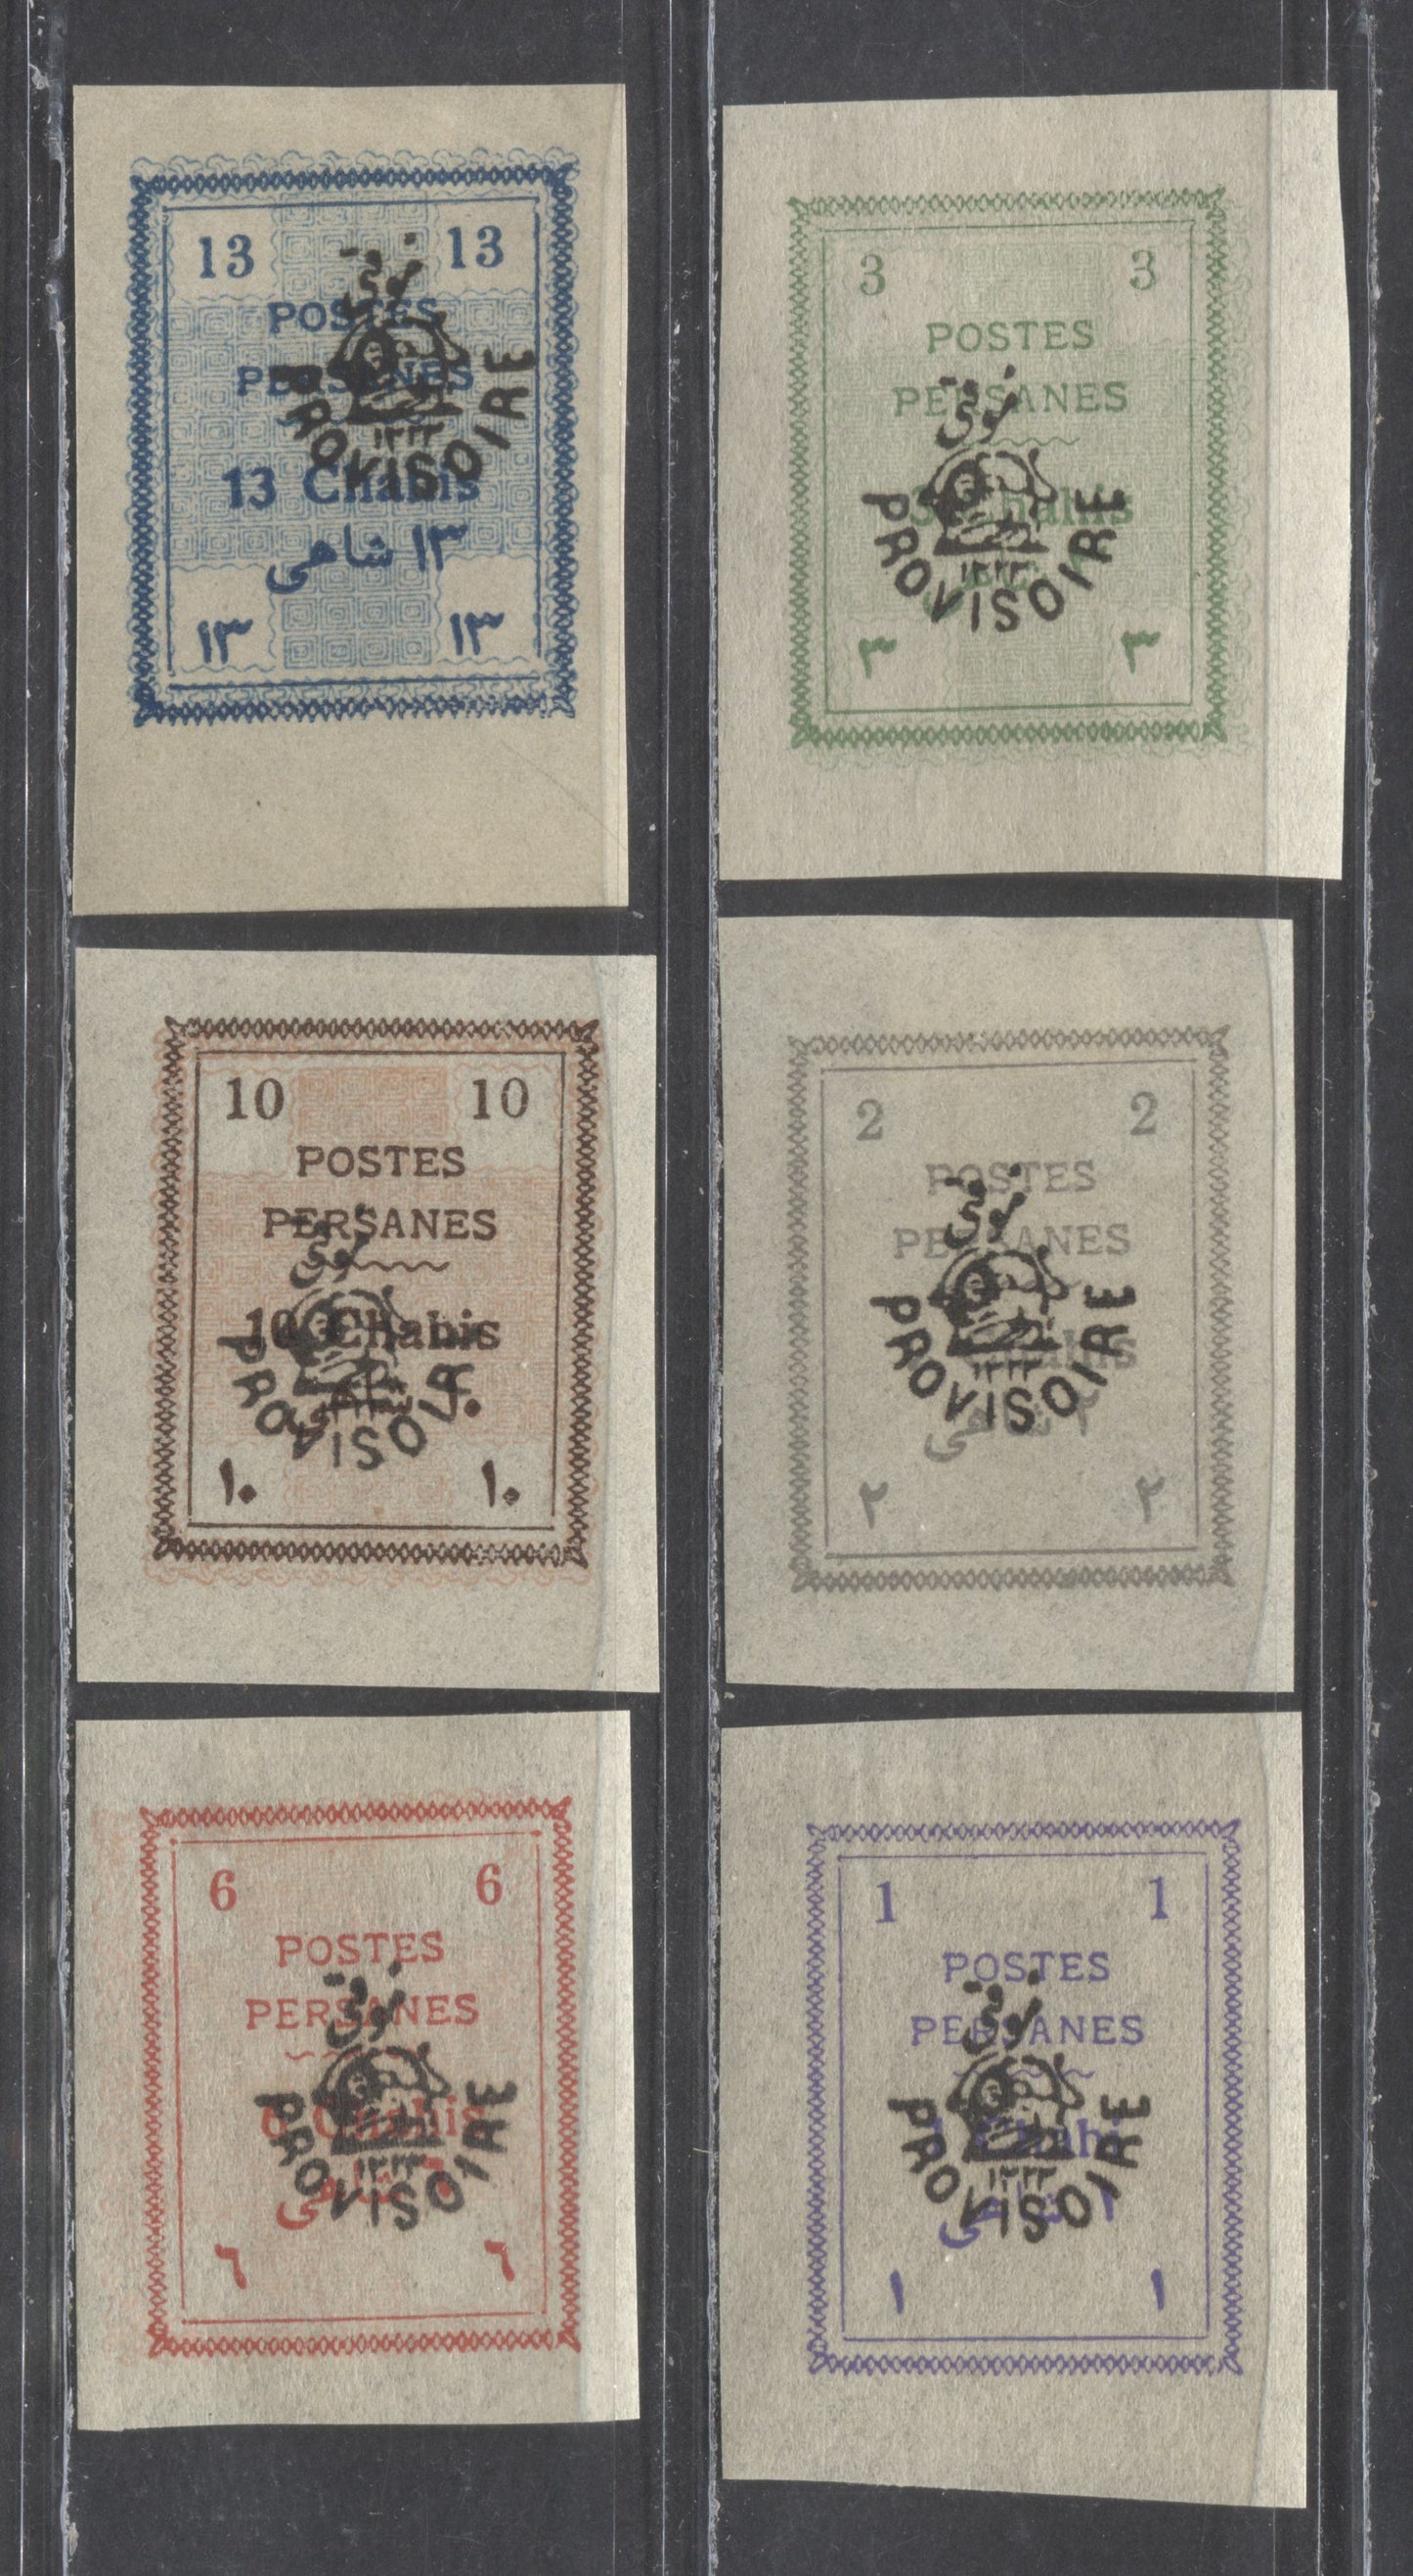 Lot 113 Persia SC#422/427 1906 Forged Overprints, 6 VFOG Singles, Click on Listing to See ALL Pictures, Estimated Value $5 USD